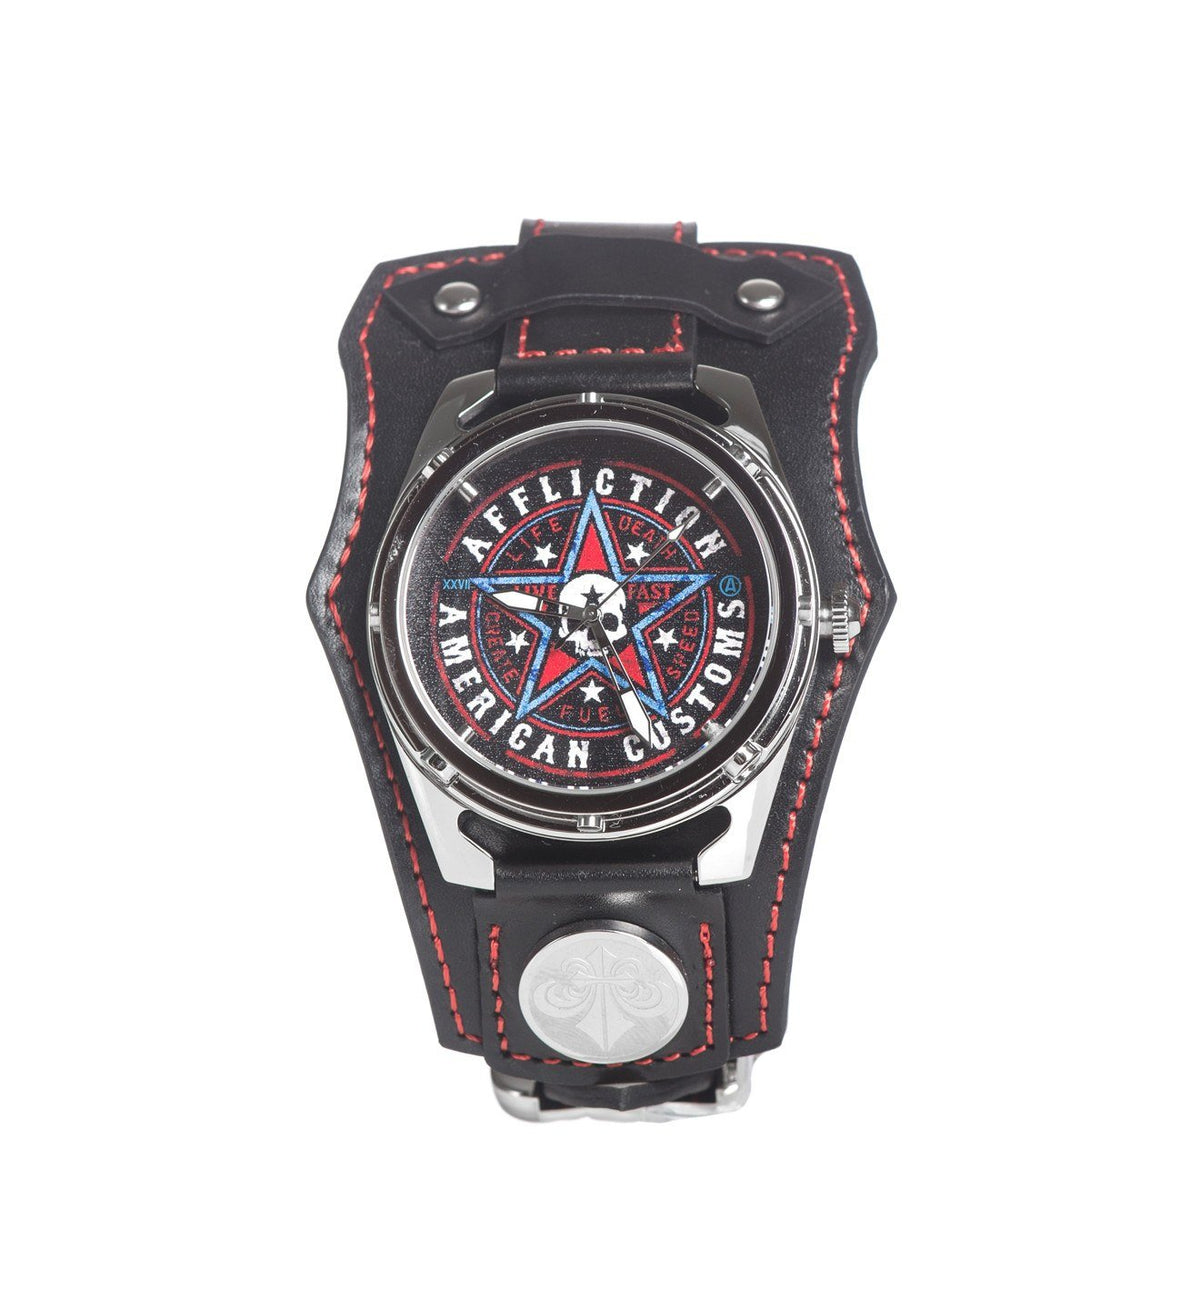 American Customs Watch - Mens Watches - Affliction Clothing